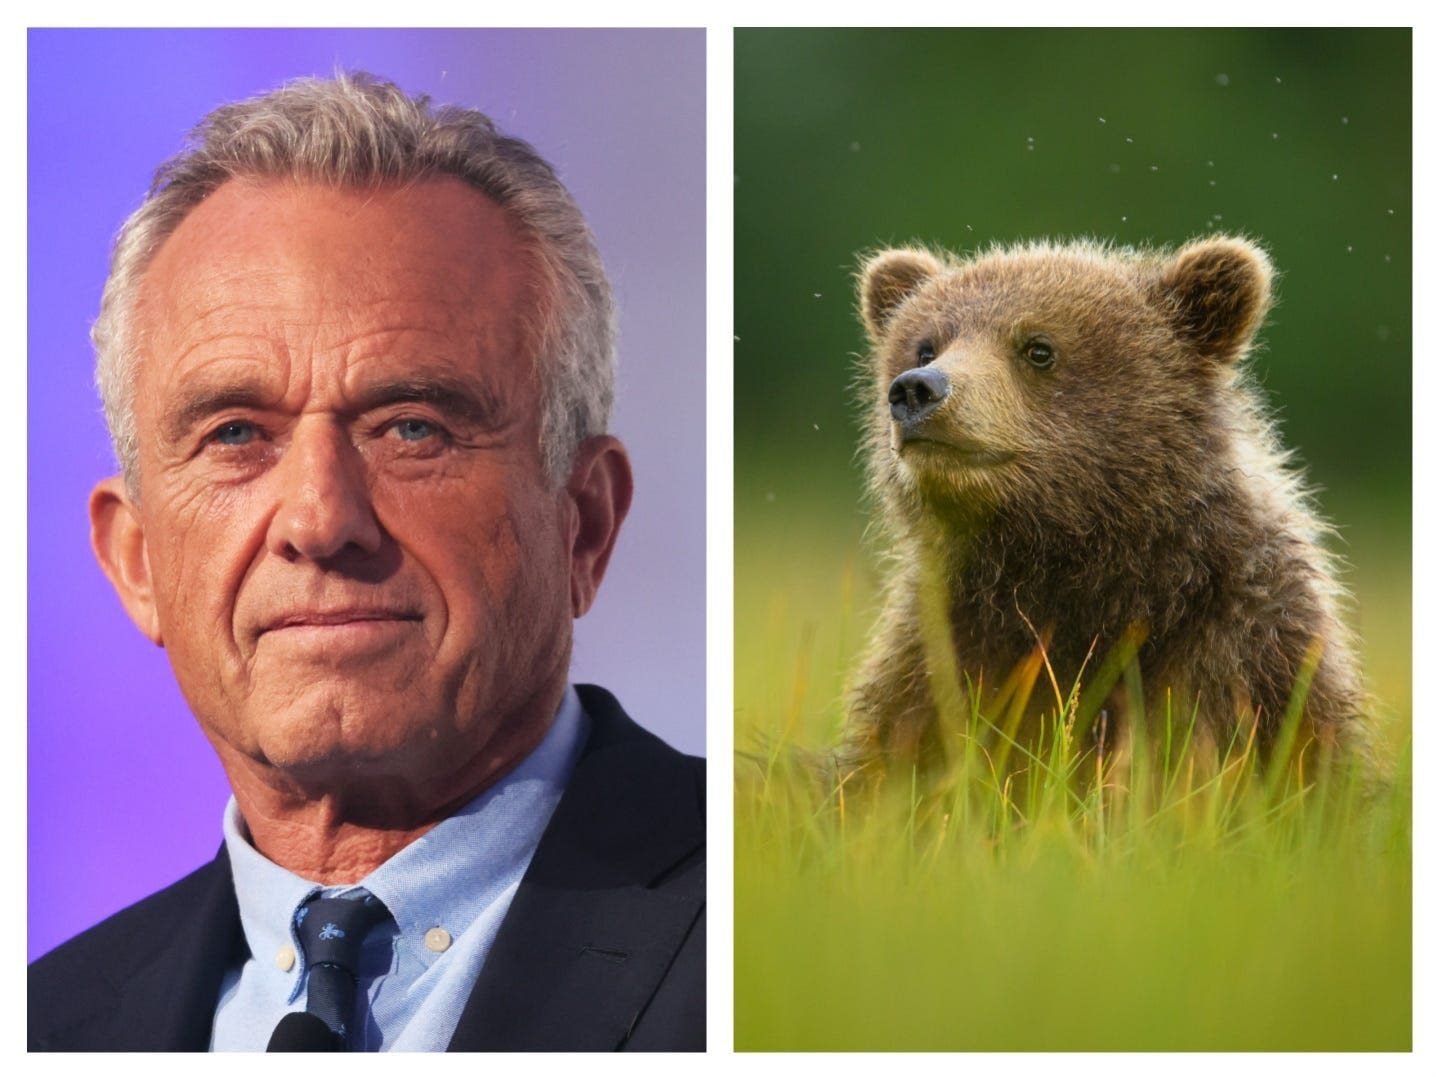 RFK Jr. says he planned to skin a dead bear cub after it was hit by a van but later dumped it in Central Park